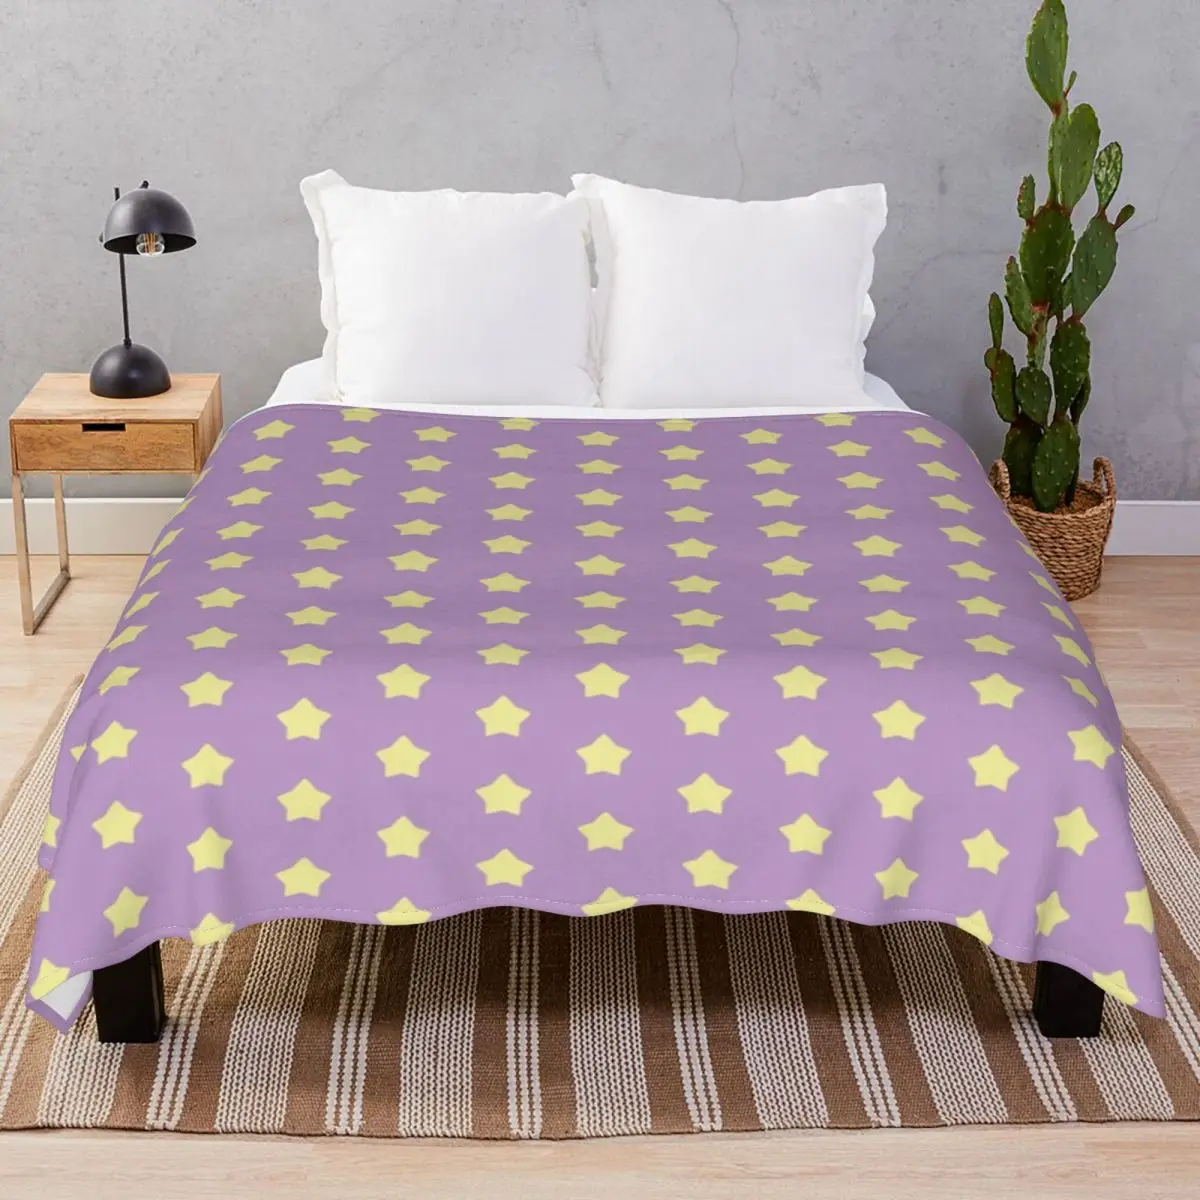 Yellow Stars On Purple Pop Blanket Flannel Plush Decoration Breathable Throw Blankets for Bedding Home Couch Travel Cinema